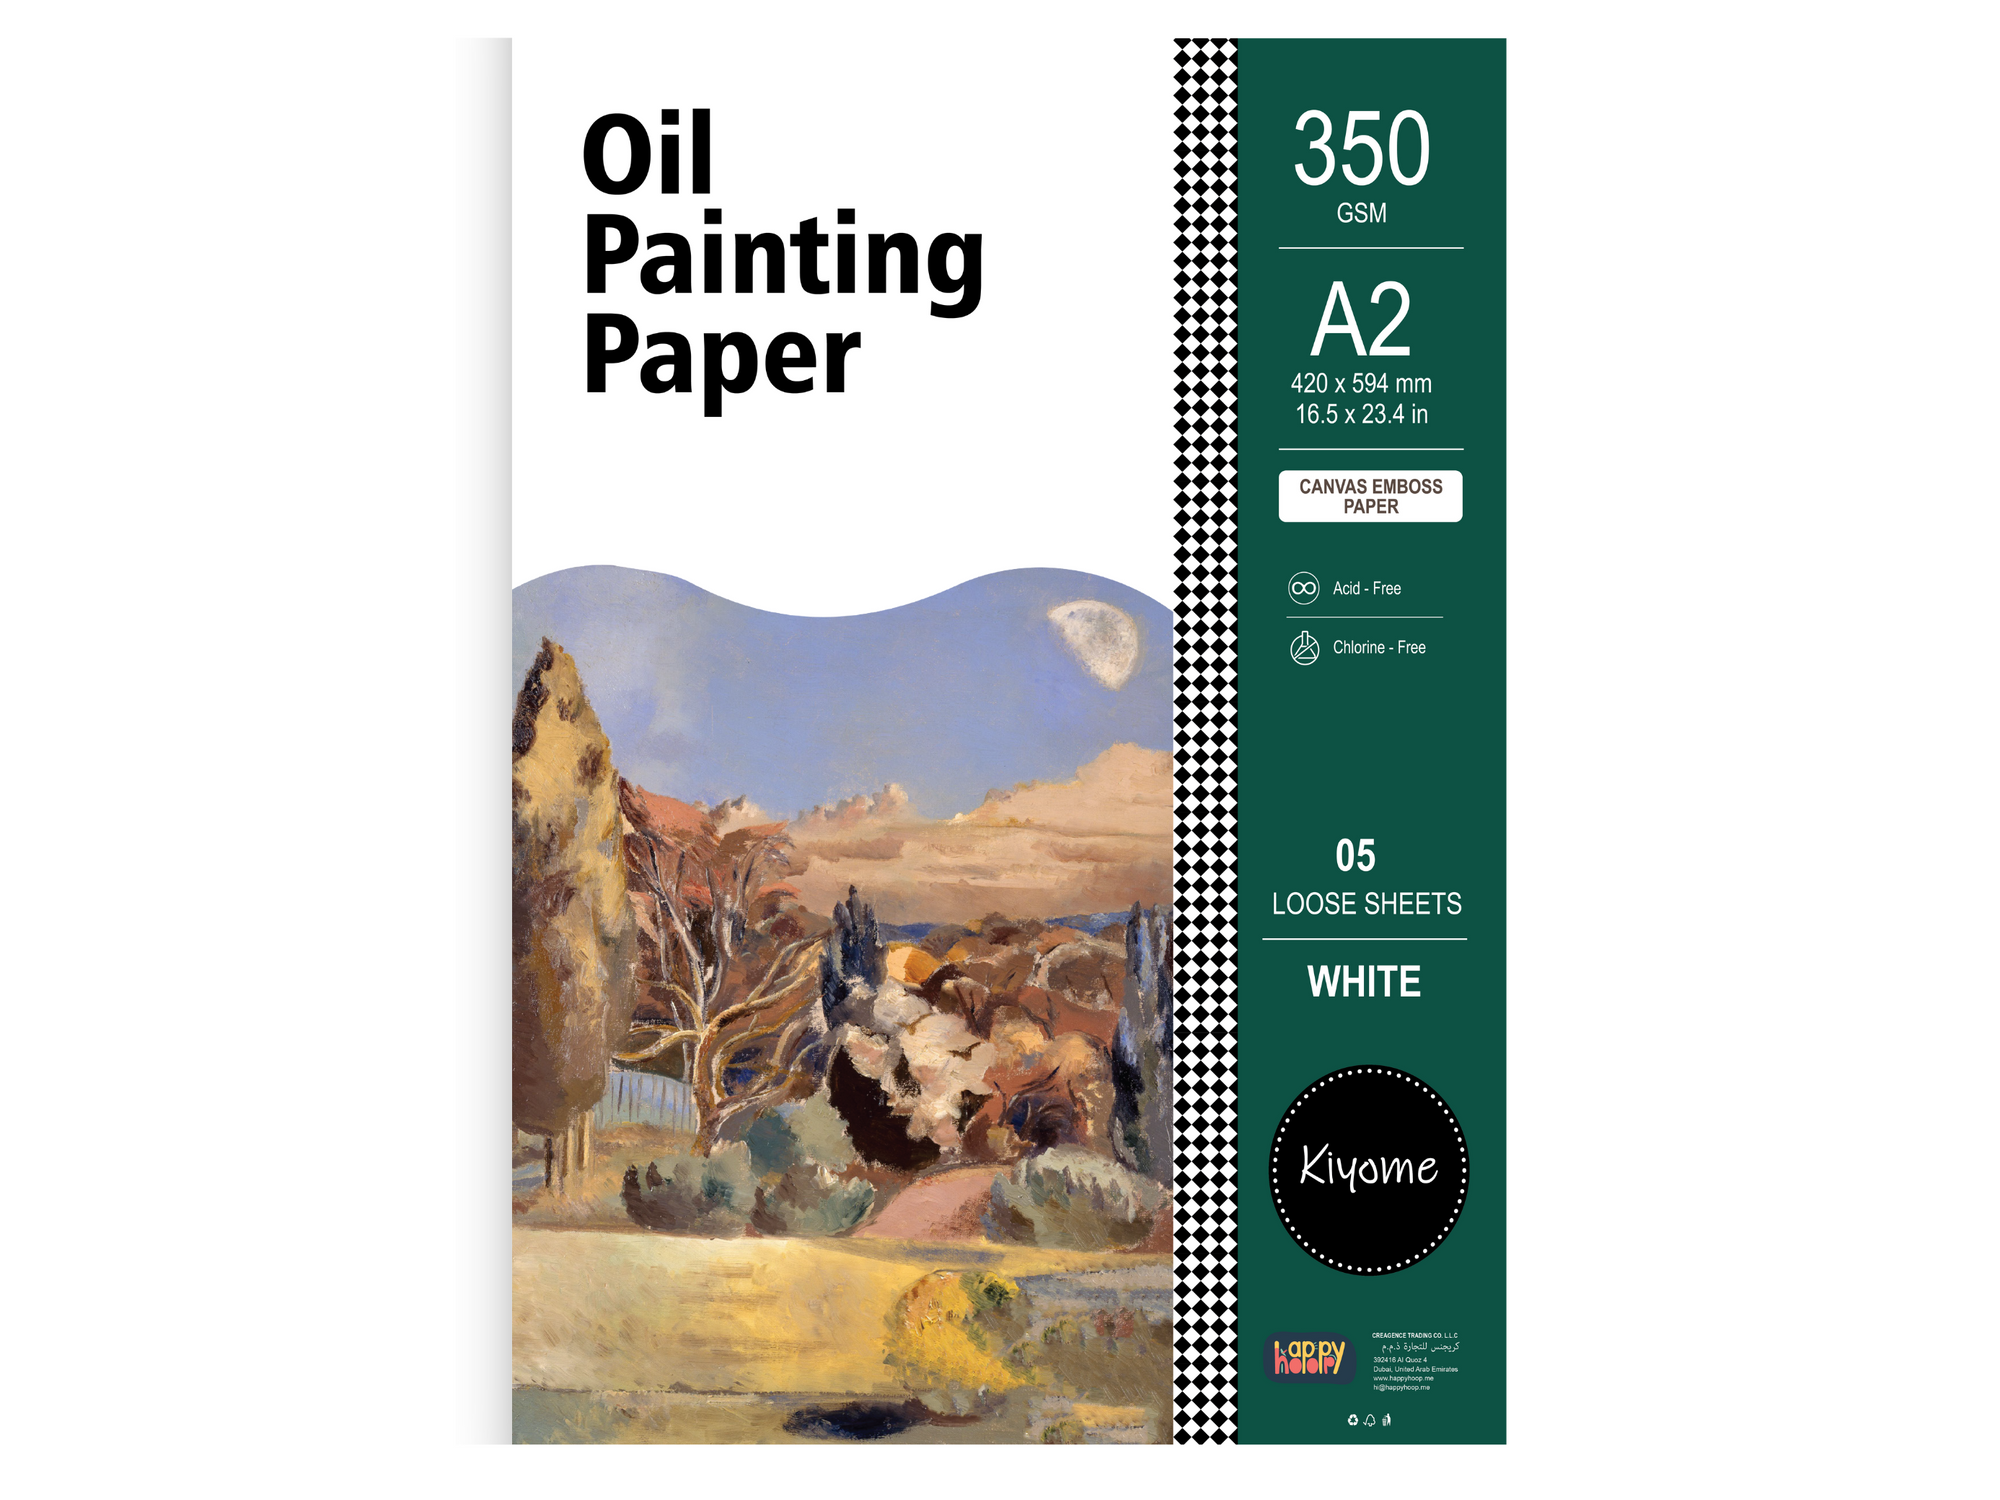 Kiyome Oil Painting Sheets | 350 GSM | A5 | 20 Sheets